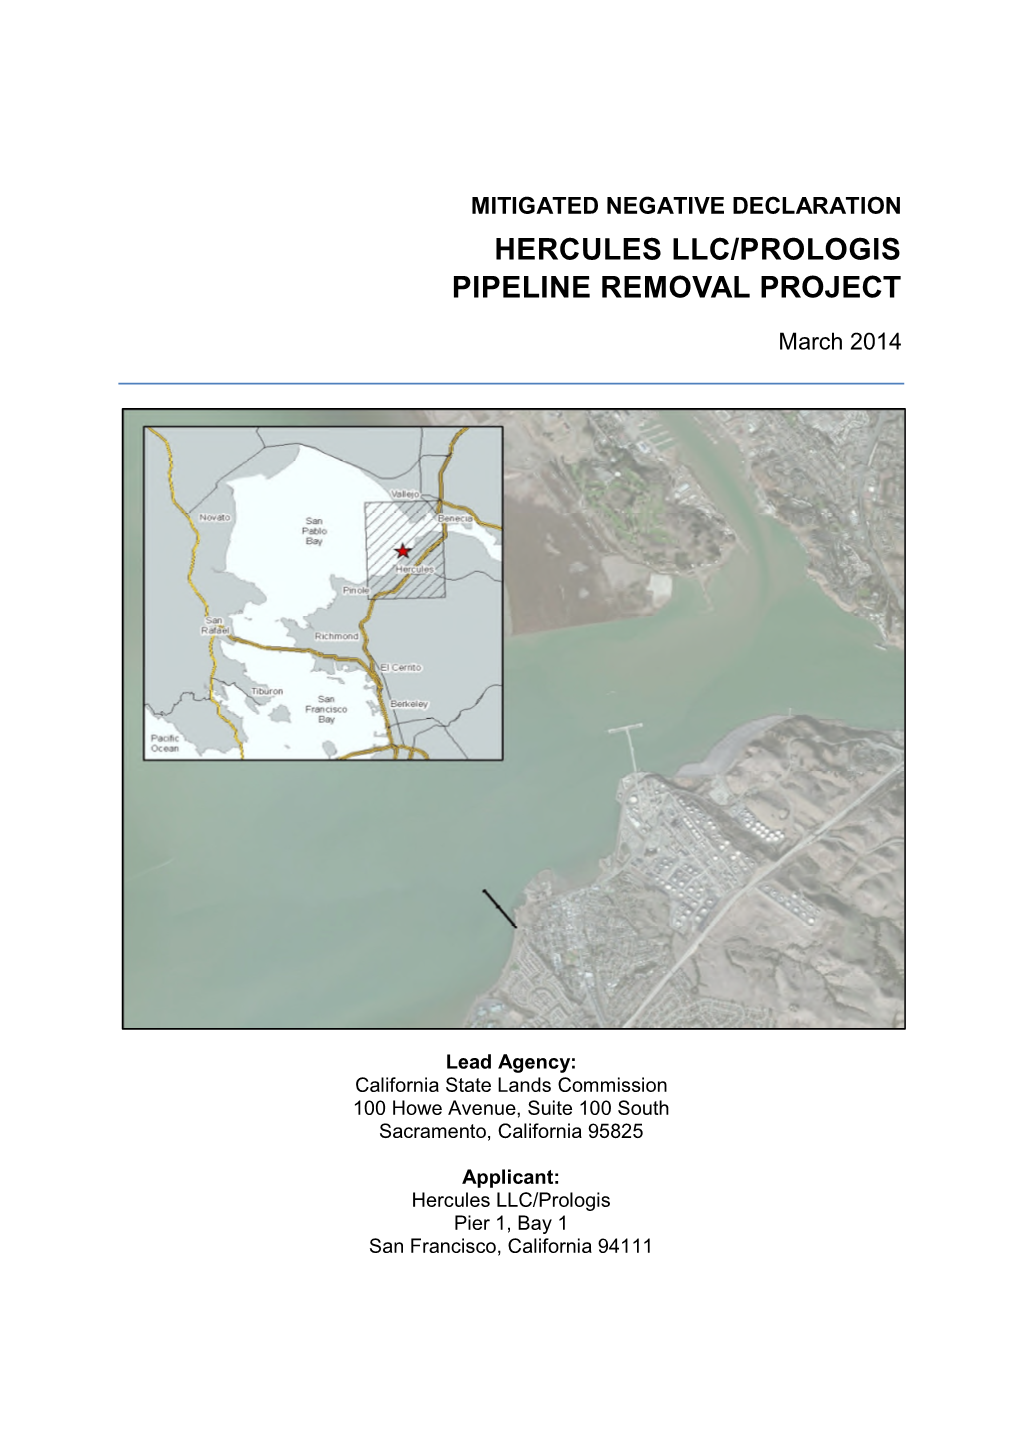 Prologis Hercules Pipeline Removal Project (Project)